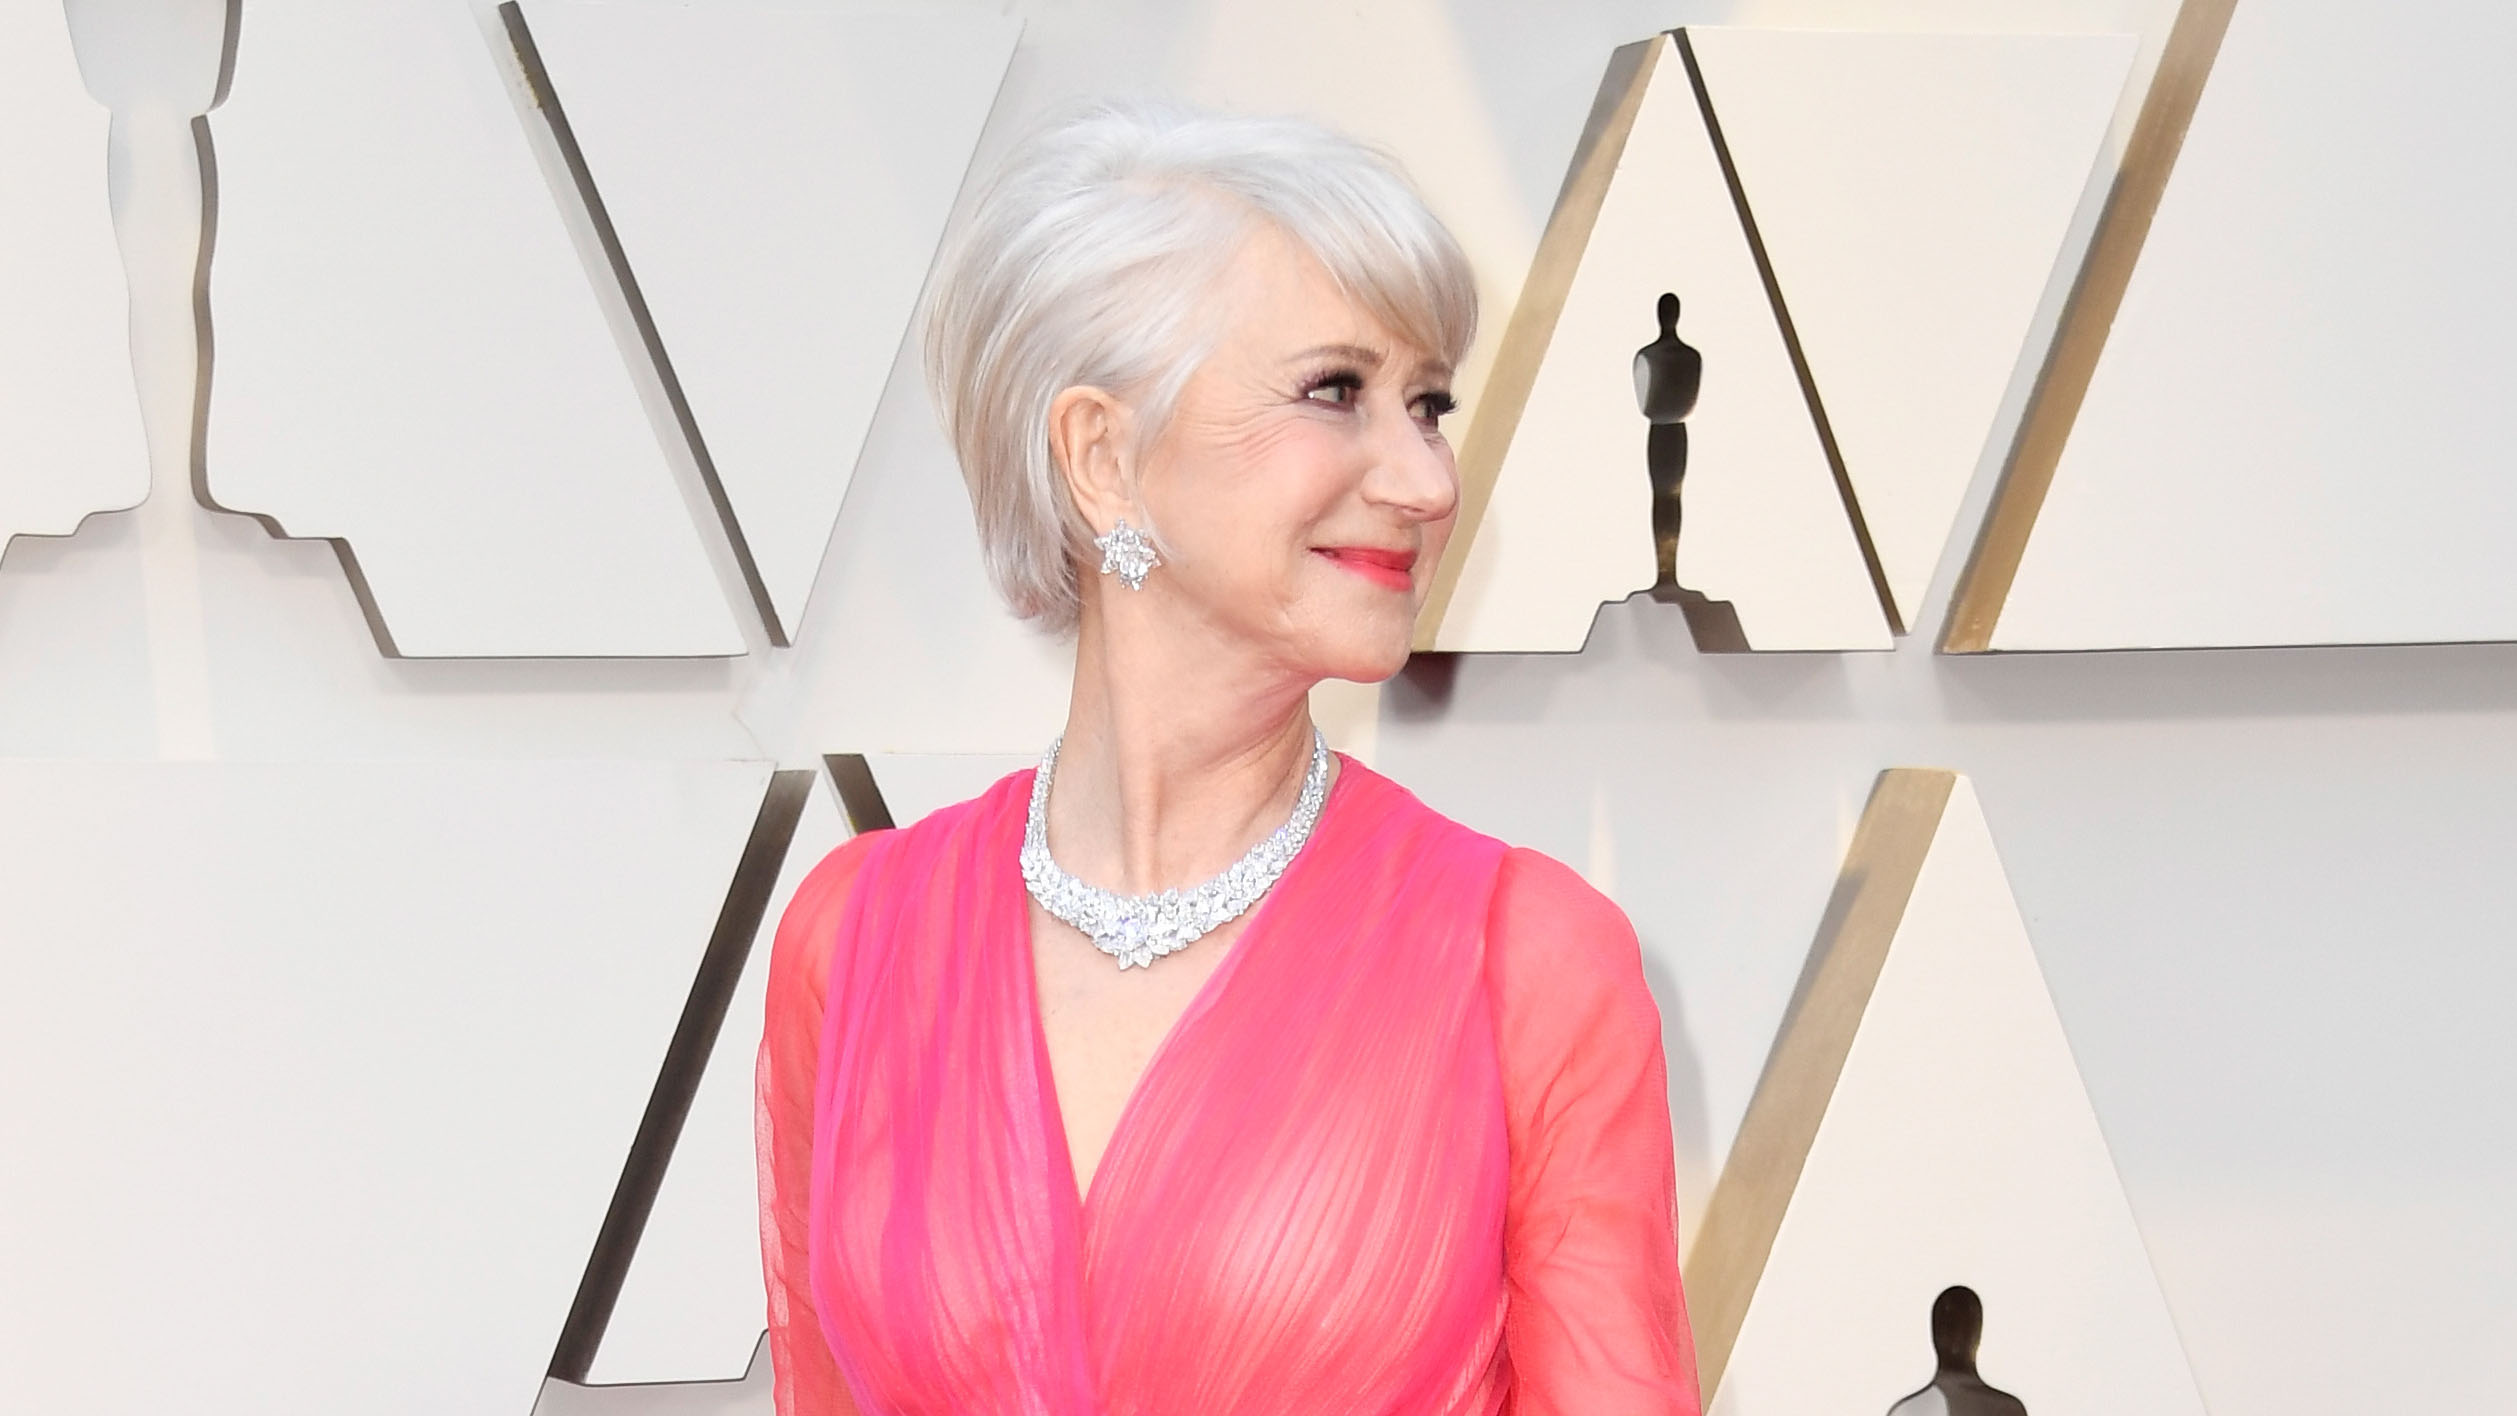 Helen Mirren Shares Photo of Herself Getting Ready for the Oscars